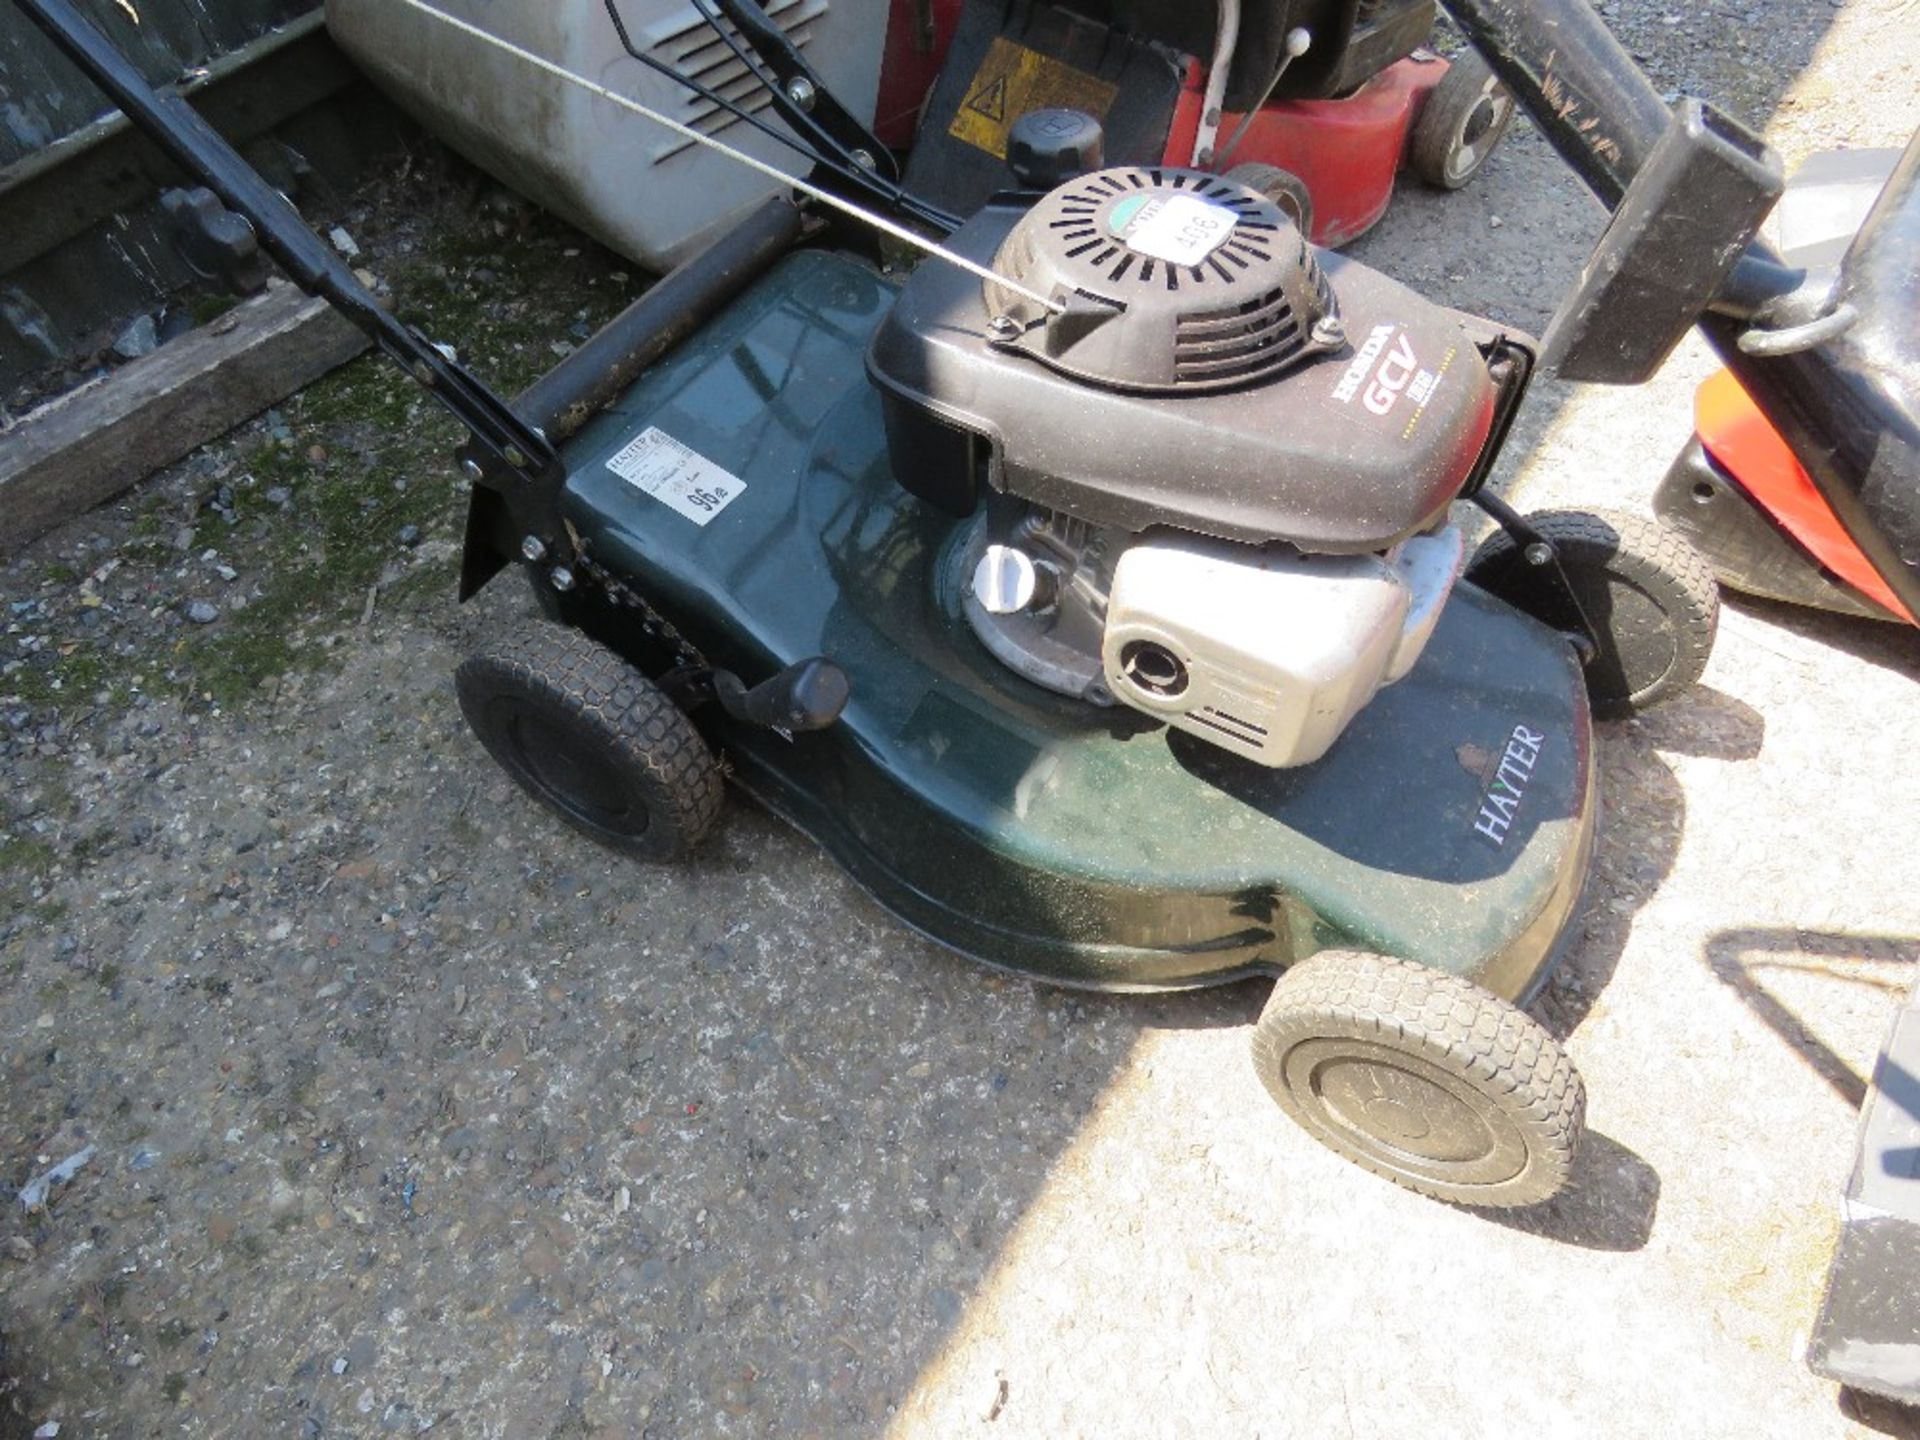 HAYTER MOTIF SELF DRIVE PETROL ENGINED LAWNMOWER, NO COLLECTOR. THIS LOT IS SOLD UNDER THE AUCTIO